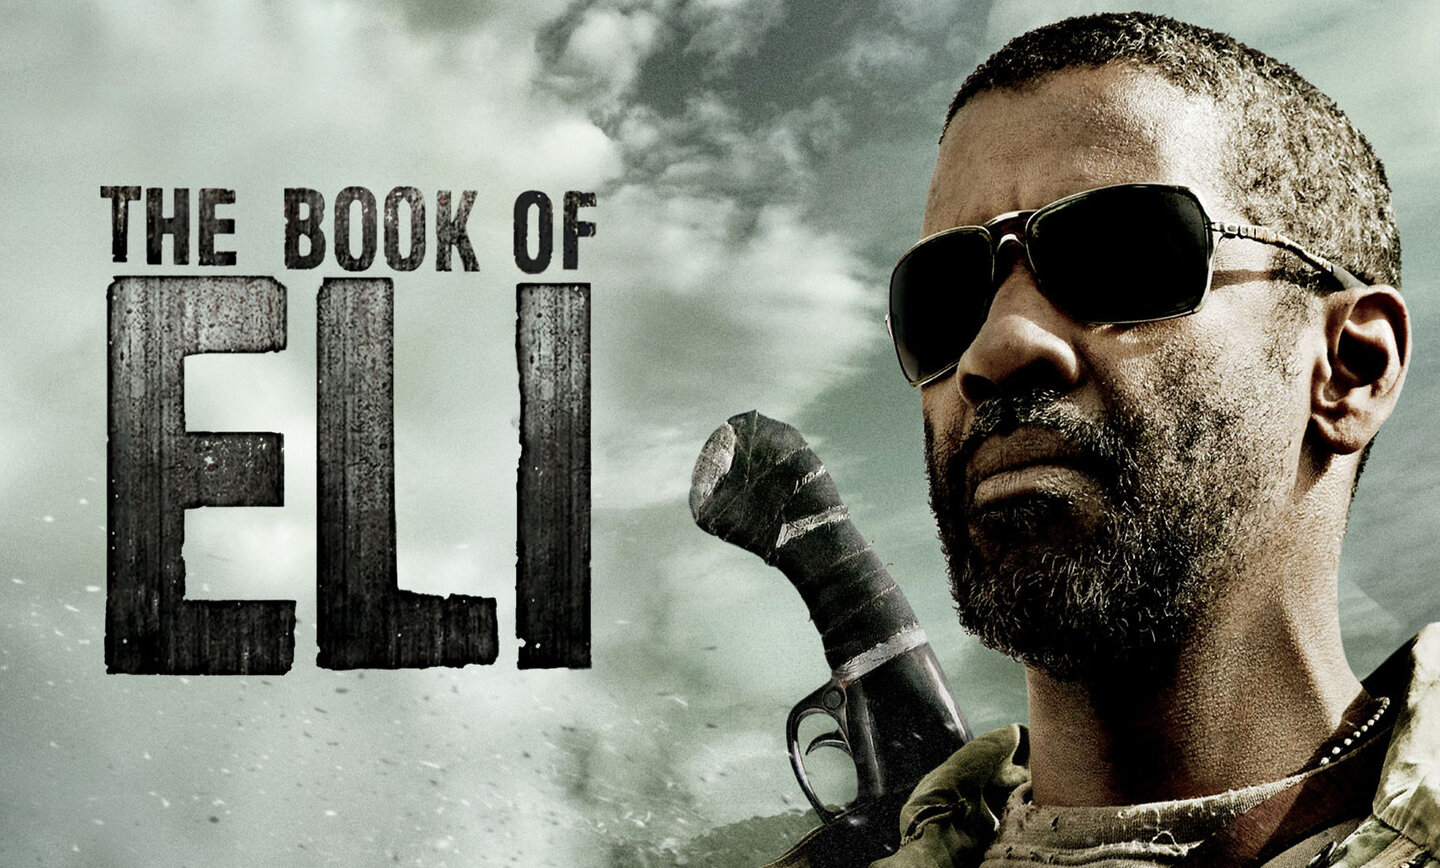 43-facts-about-the-movie-the-book-of-eli-1696667023